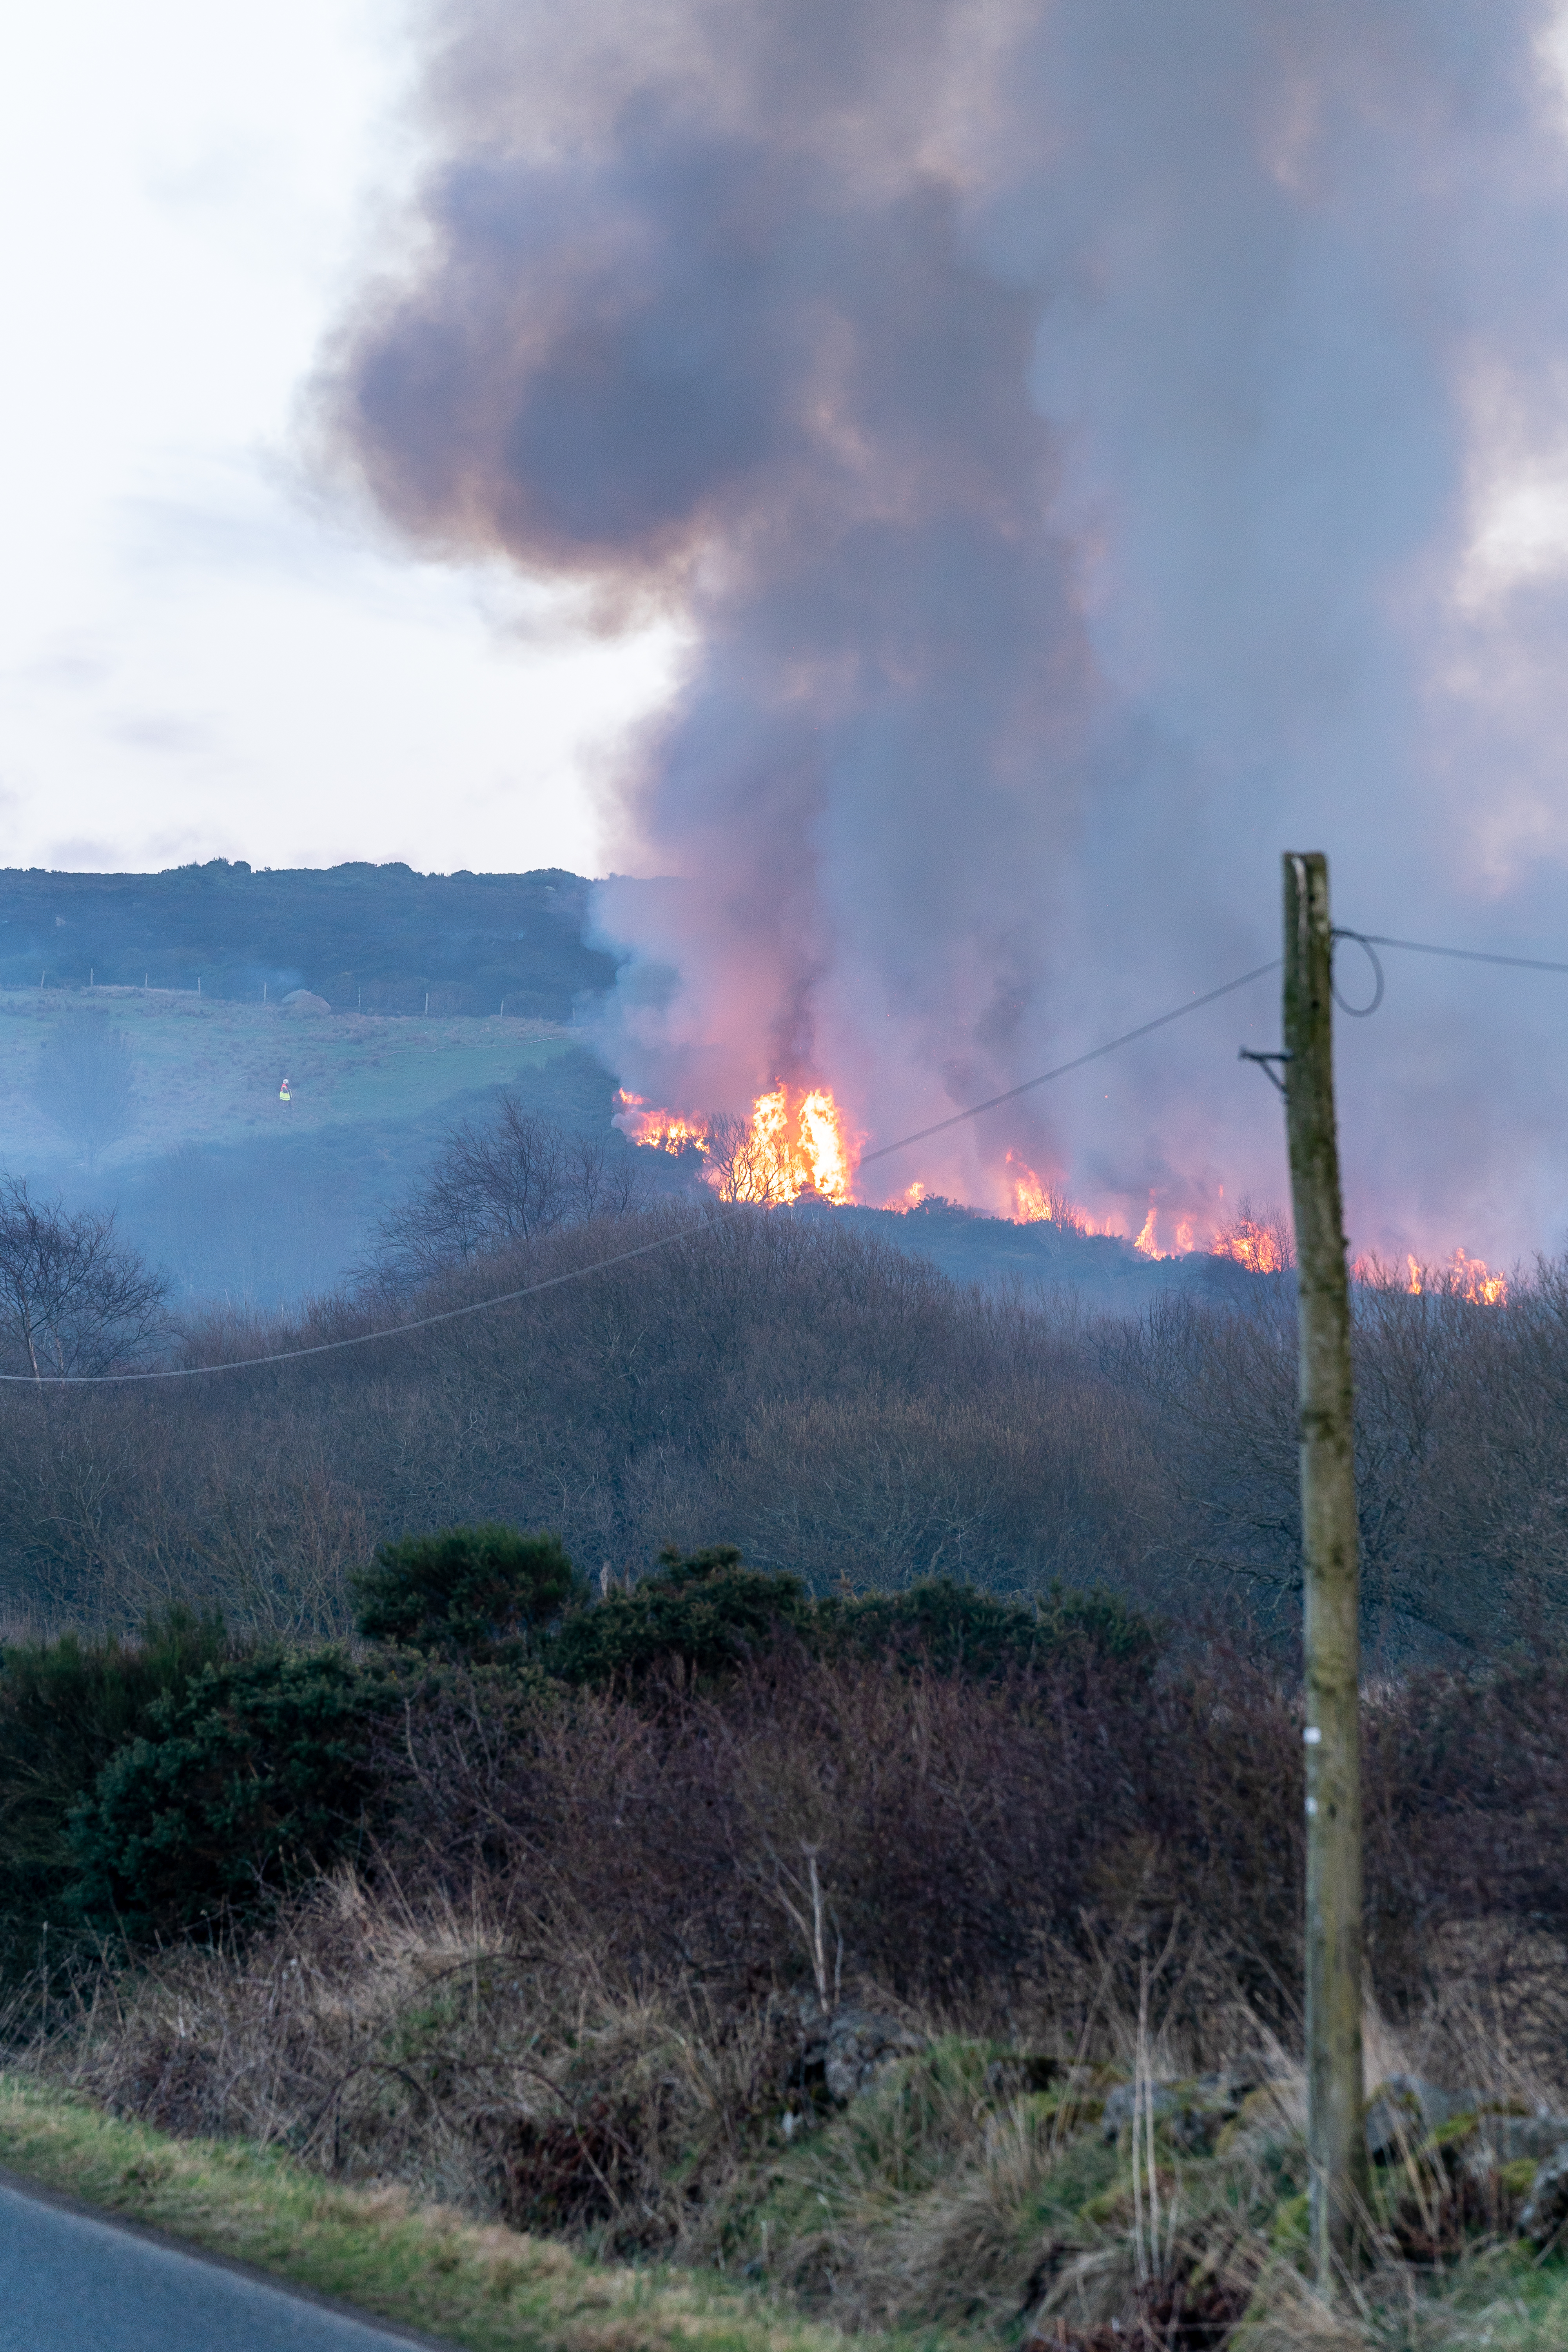 This is the scene of the Gorse Fire at Culvie Hill near Cornhill, Aberdeenshire, Scotland on Tuesday 5 March 2019. Photographed by JASPERIMAGE ©.